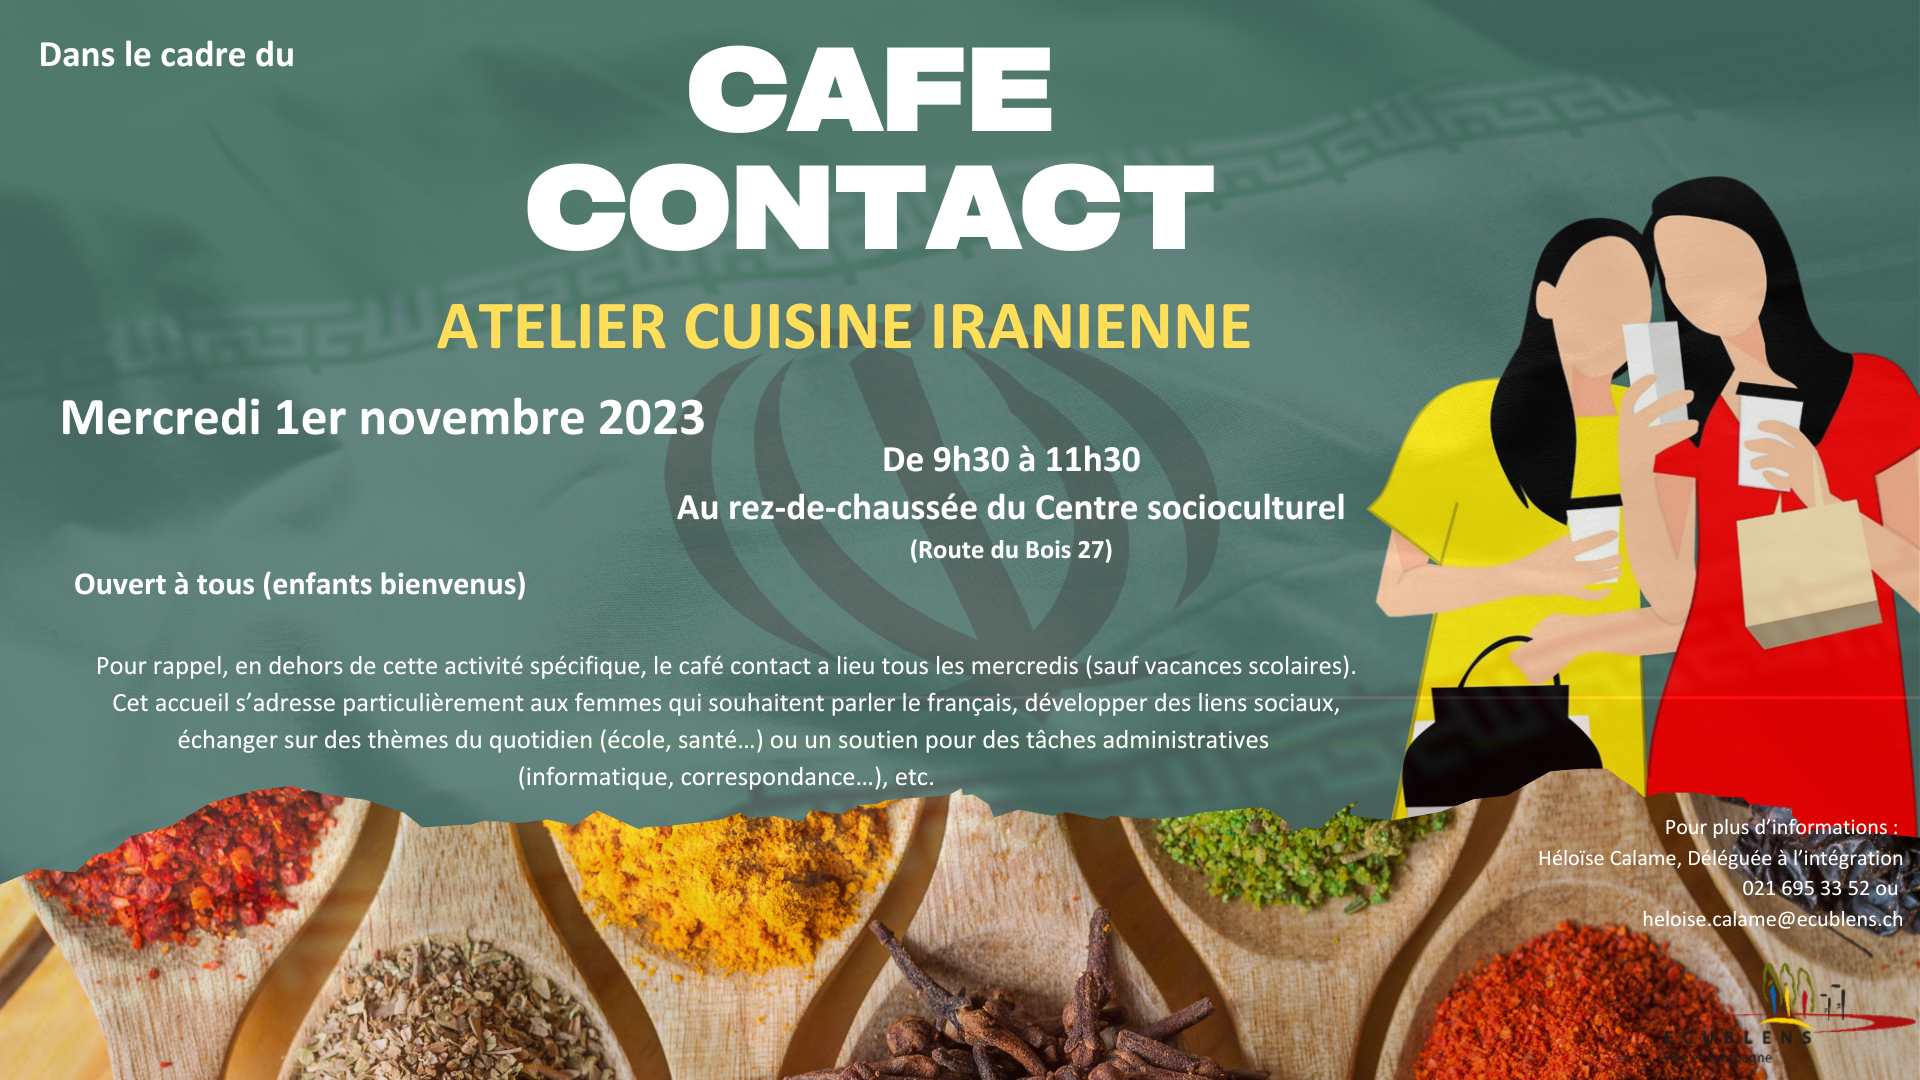 Cafe contact 2023 11 01